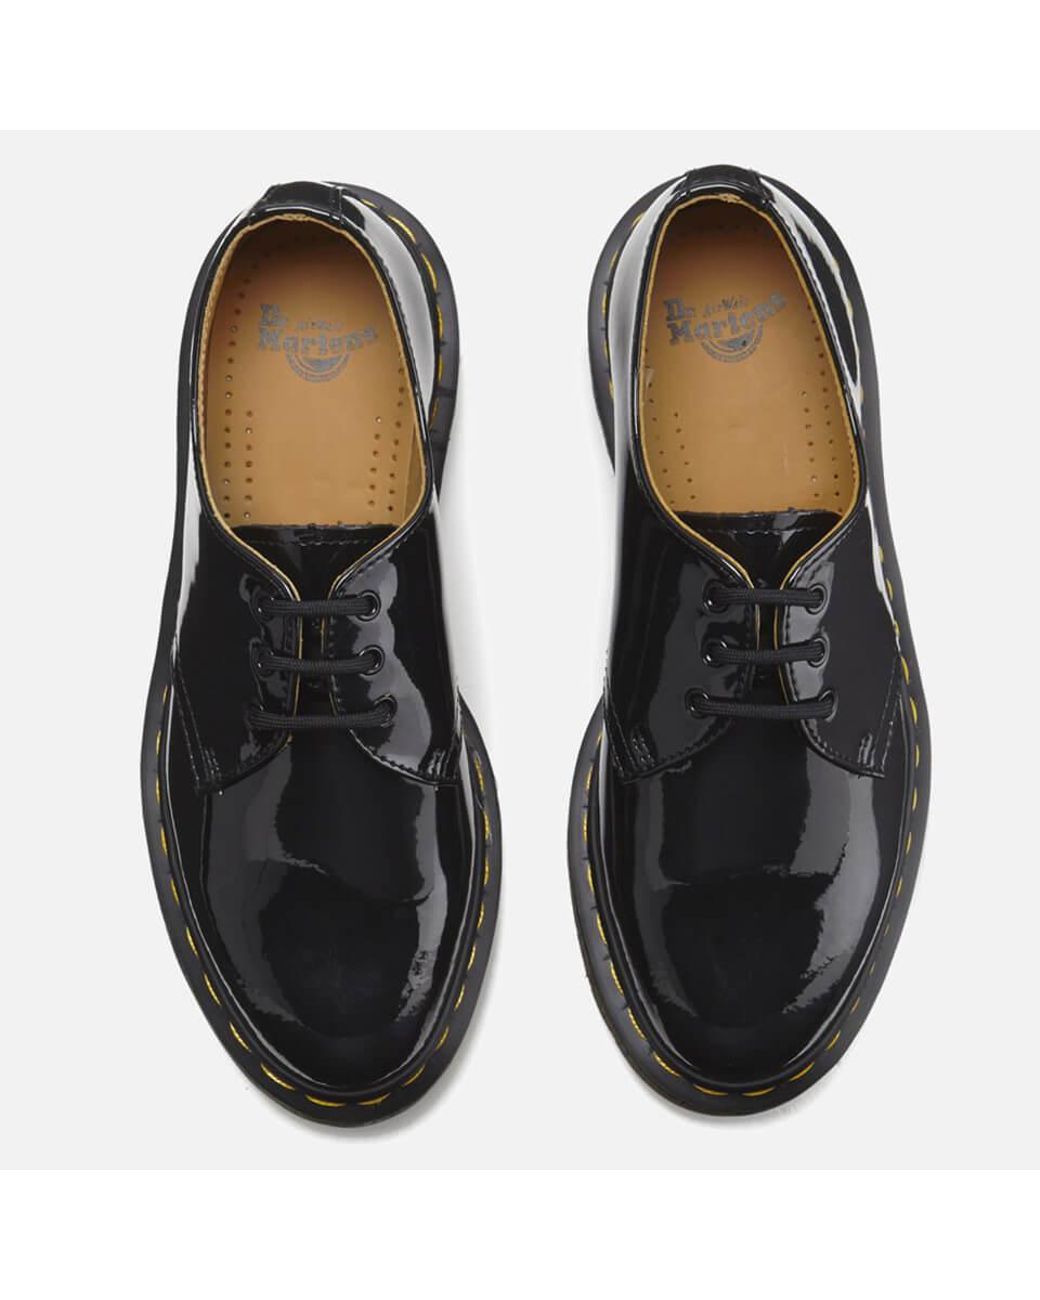 Dr. Martens Leather 1461 Patent Lamper 3-eye Shoes in Black - Lyst